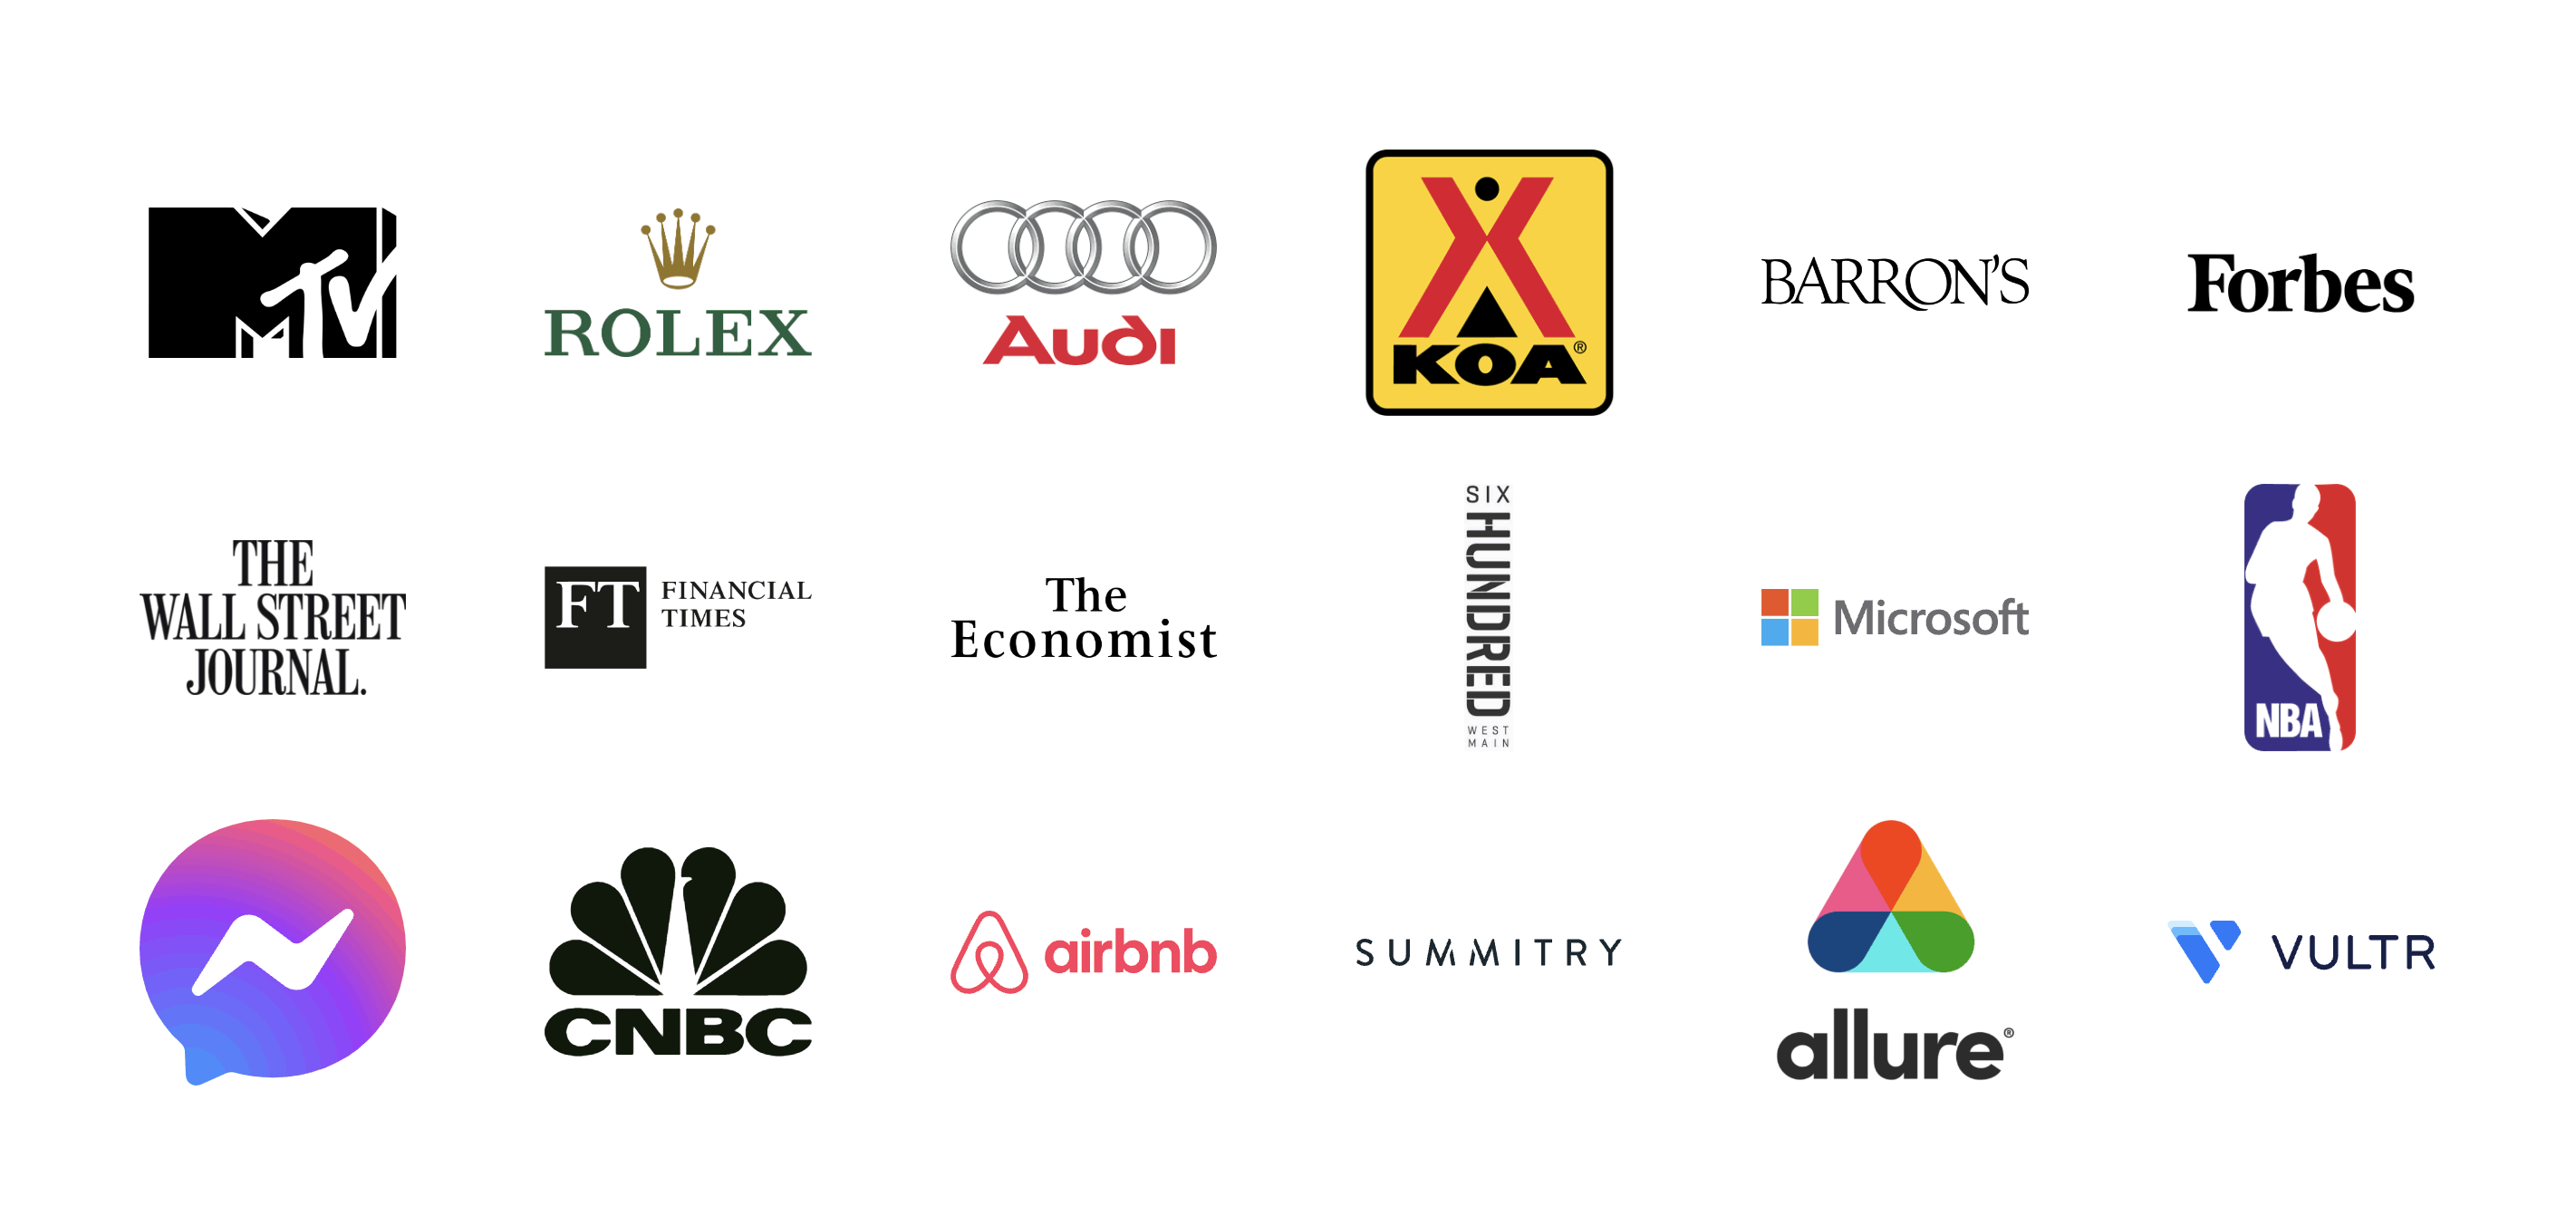 grid of logos, before and after normalization